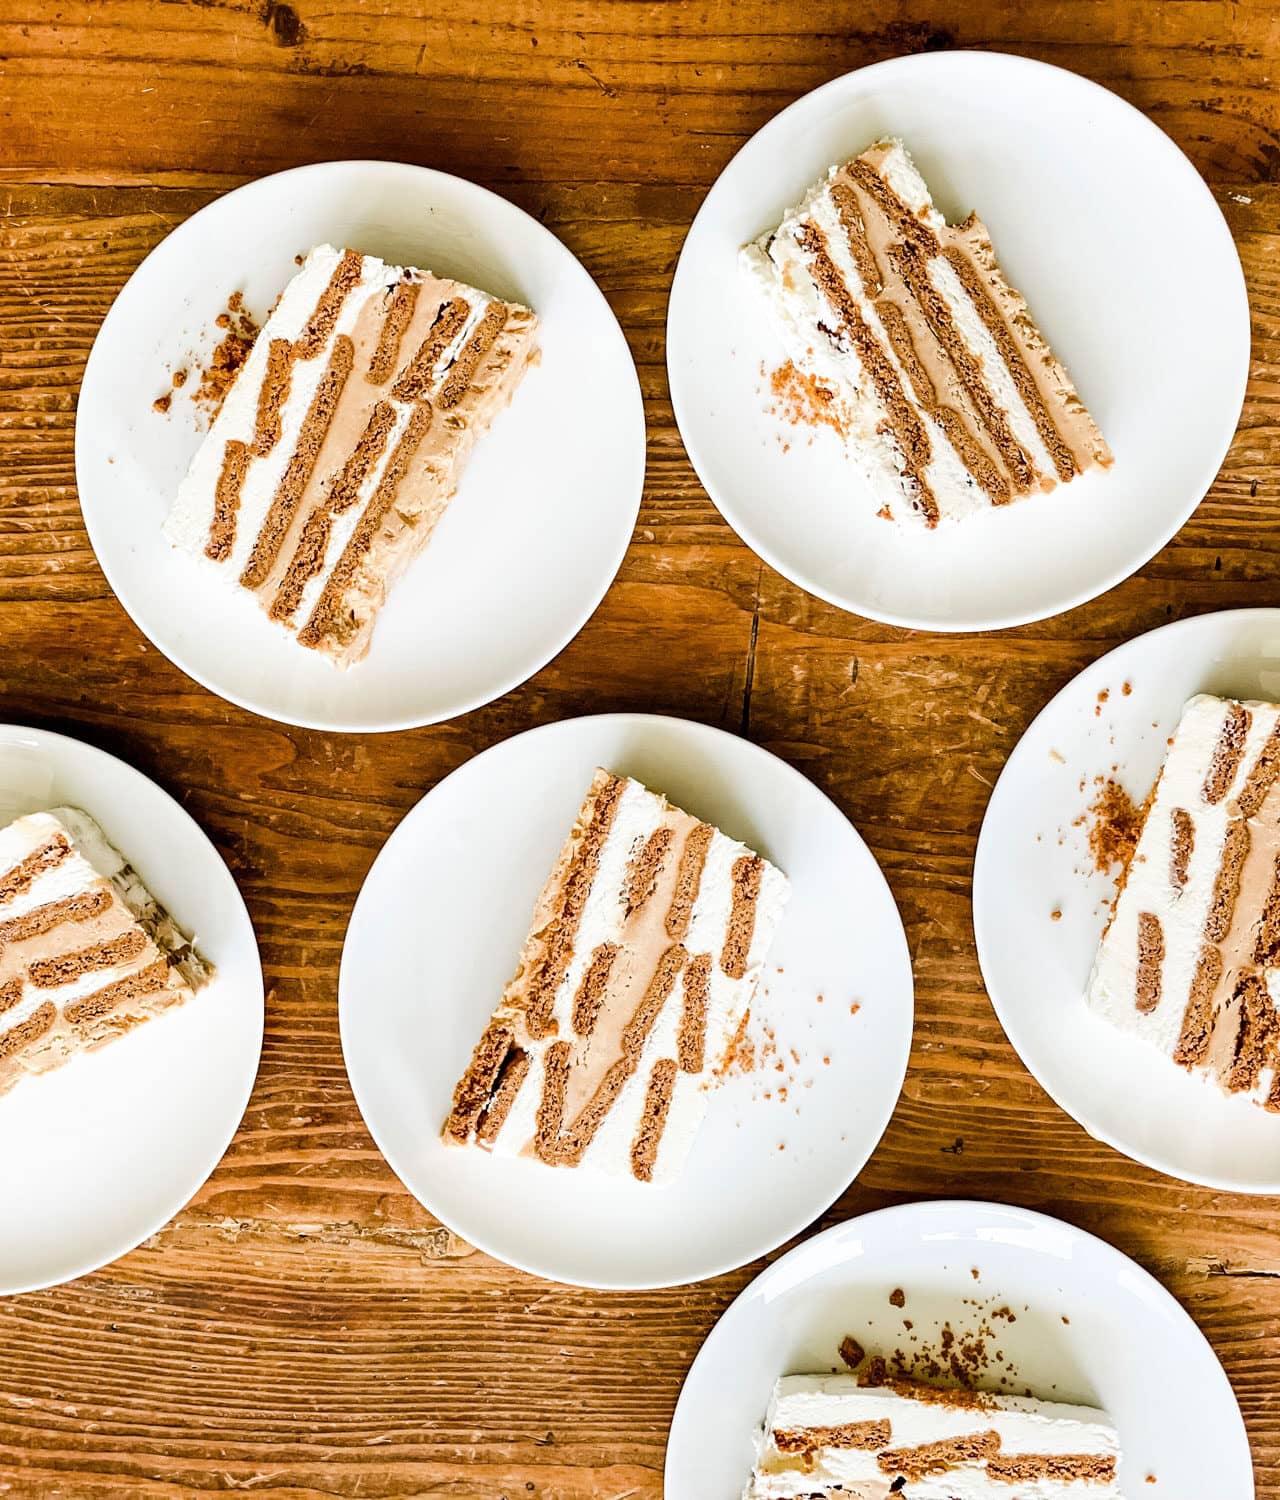 This is Sheri Silver's recipe for the most delicious icebox cake with only 4 ingredients.